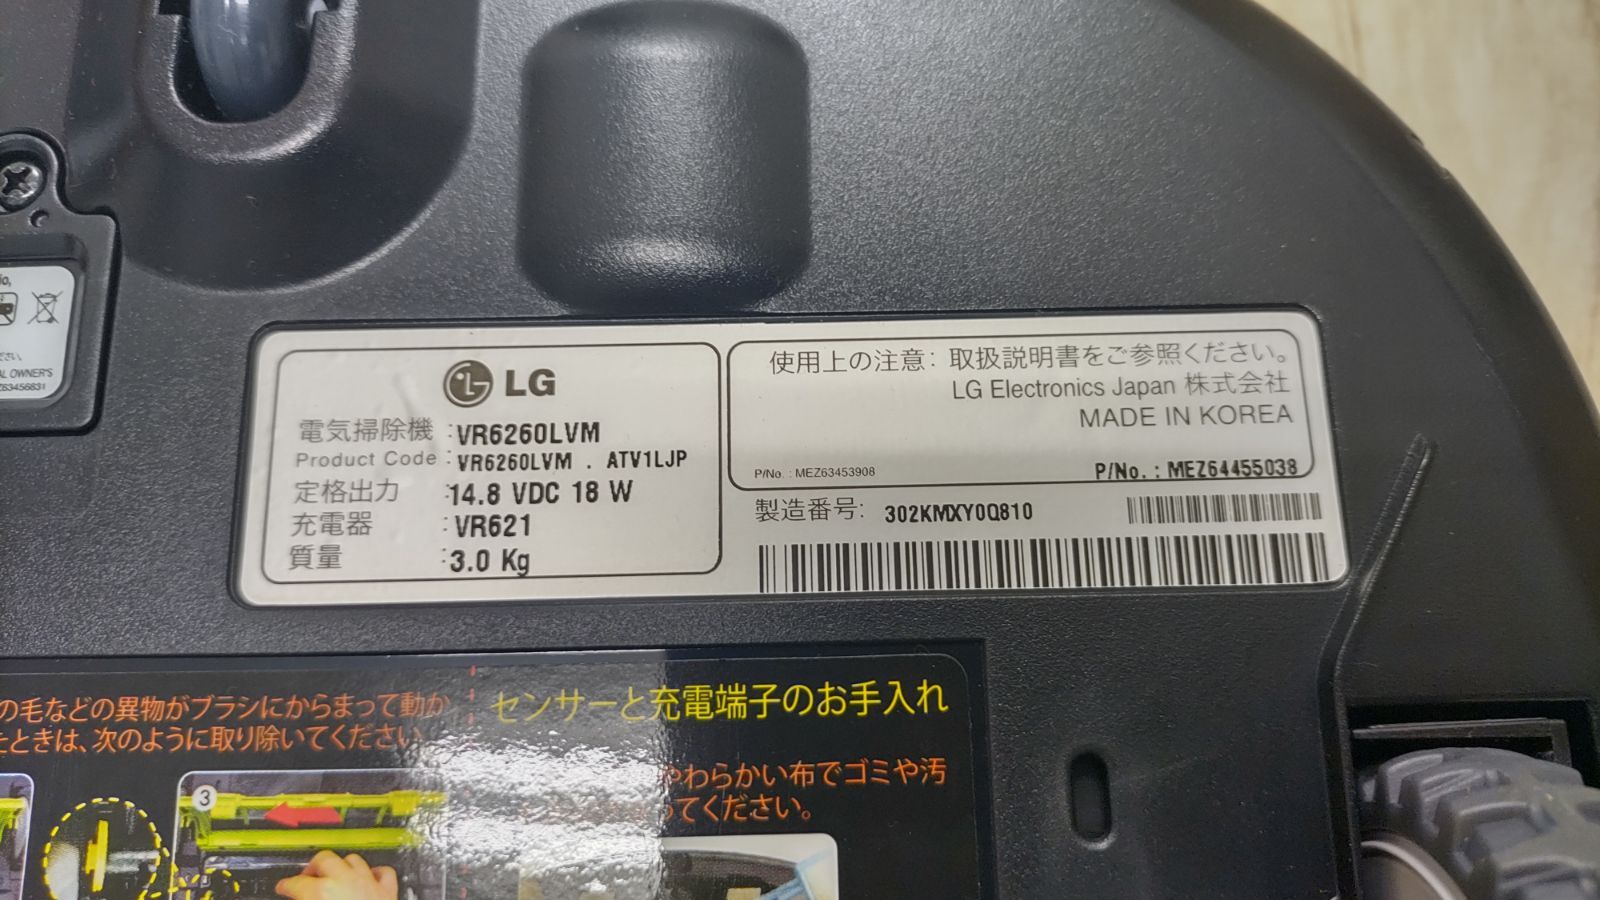 LG ホームボット スクエア VR6260LVM お掃除ロボット - 中古ショップつ